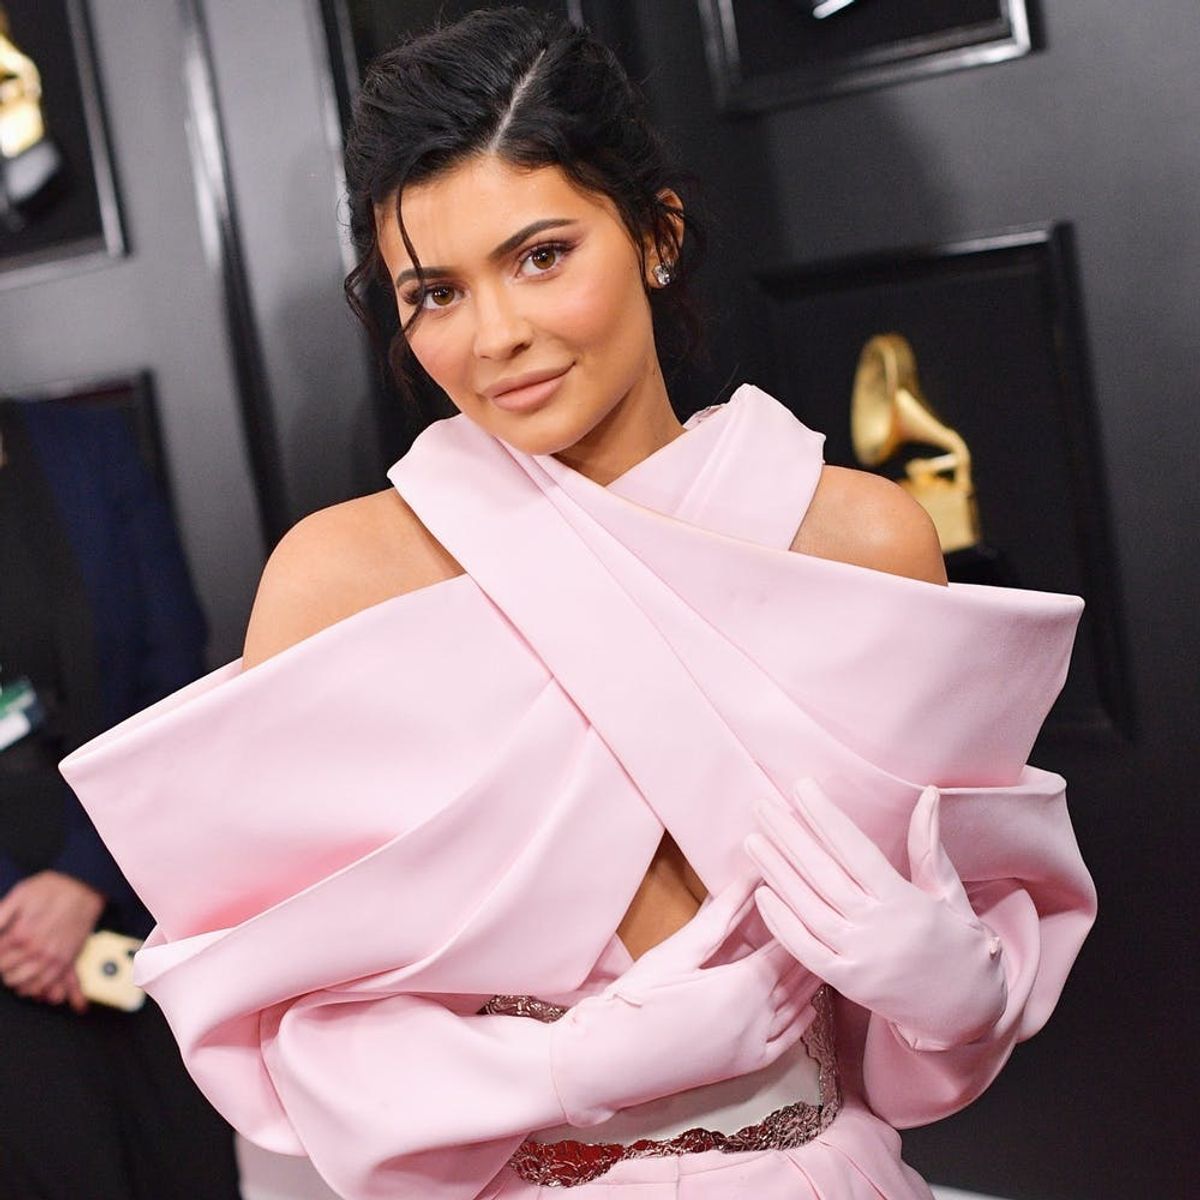 Kylie Jenner Claps Back at Critics Who Say She’s Not a ‘Self-Made’ Billionaire